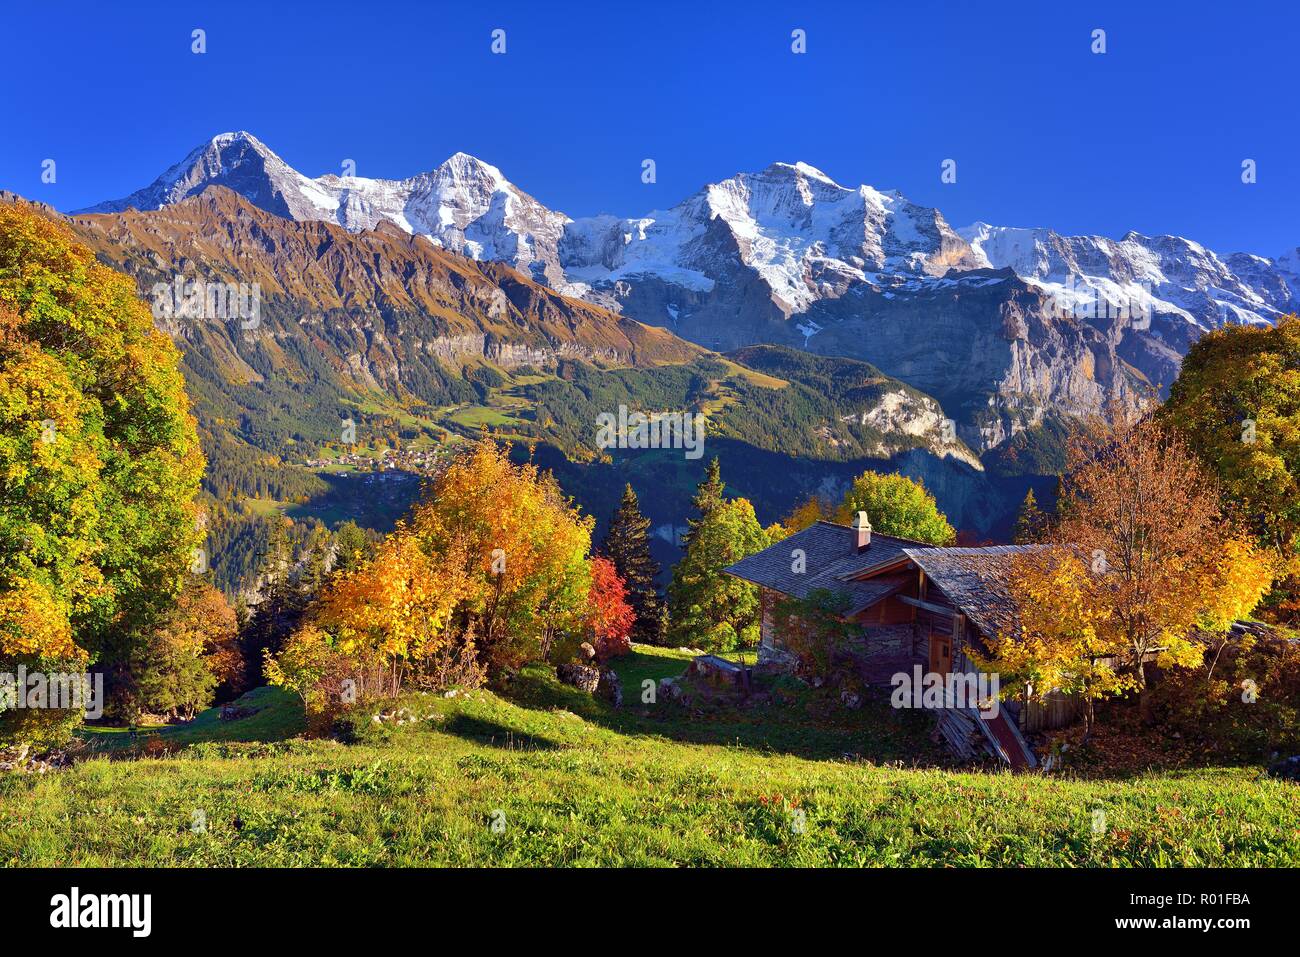 Alpine hut with autumn-coloured deciduous trees, behind them mountains Eiger, Mönch, Jungfrau, Sulwald, Bernese Oberland Stock Photo